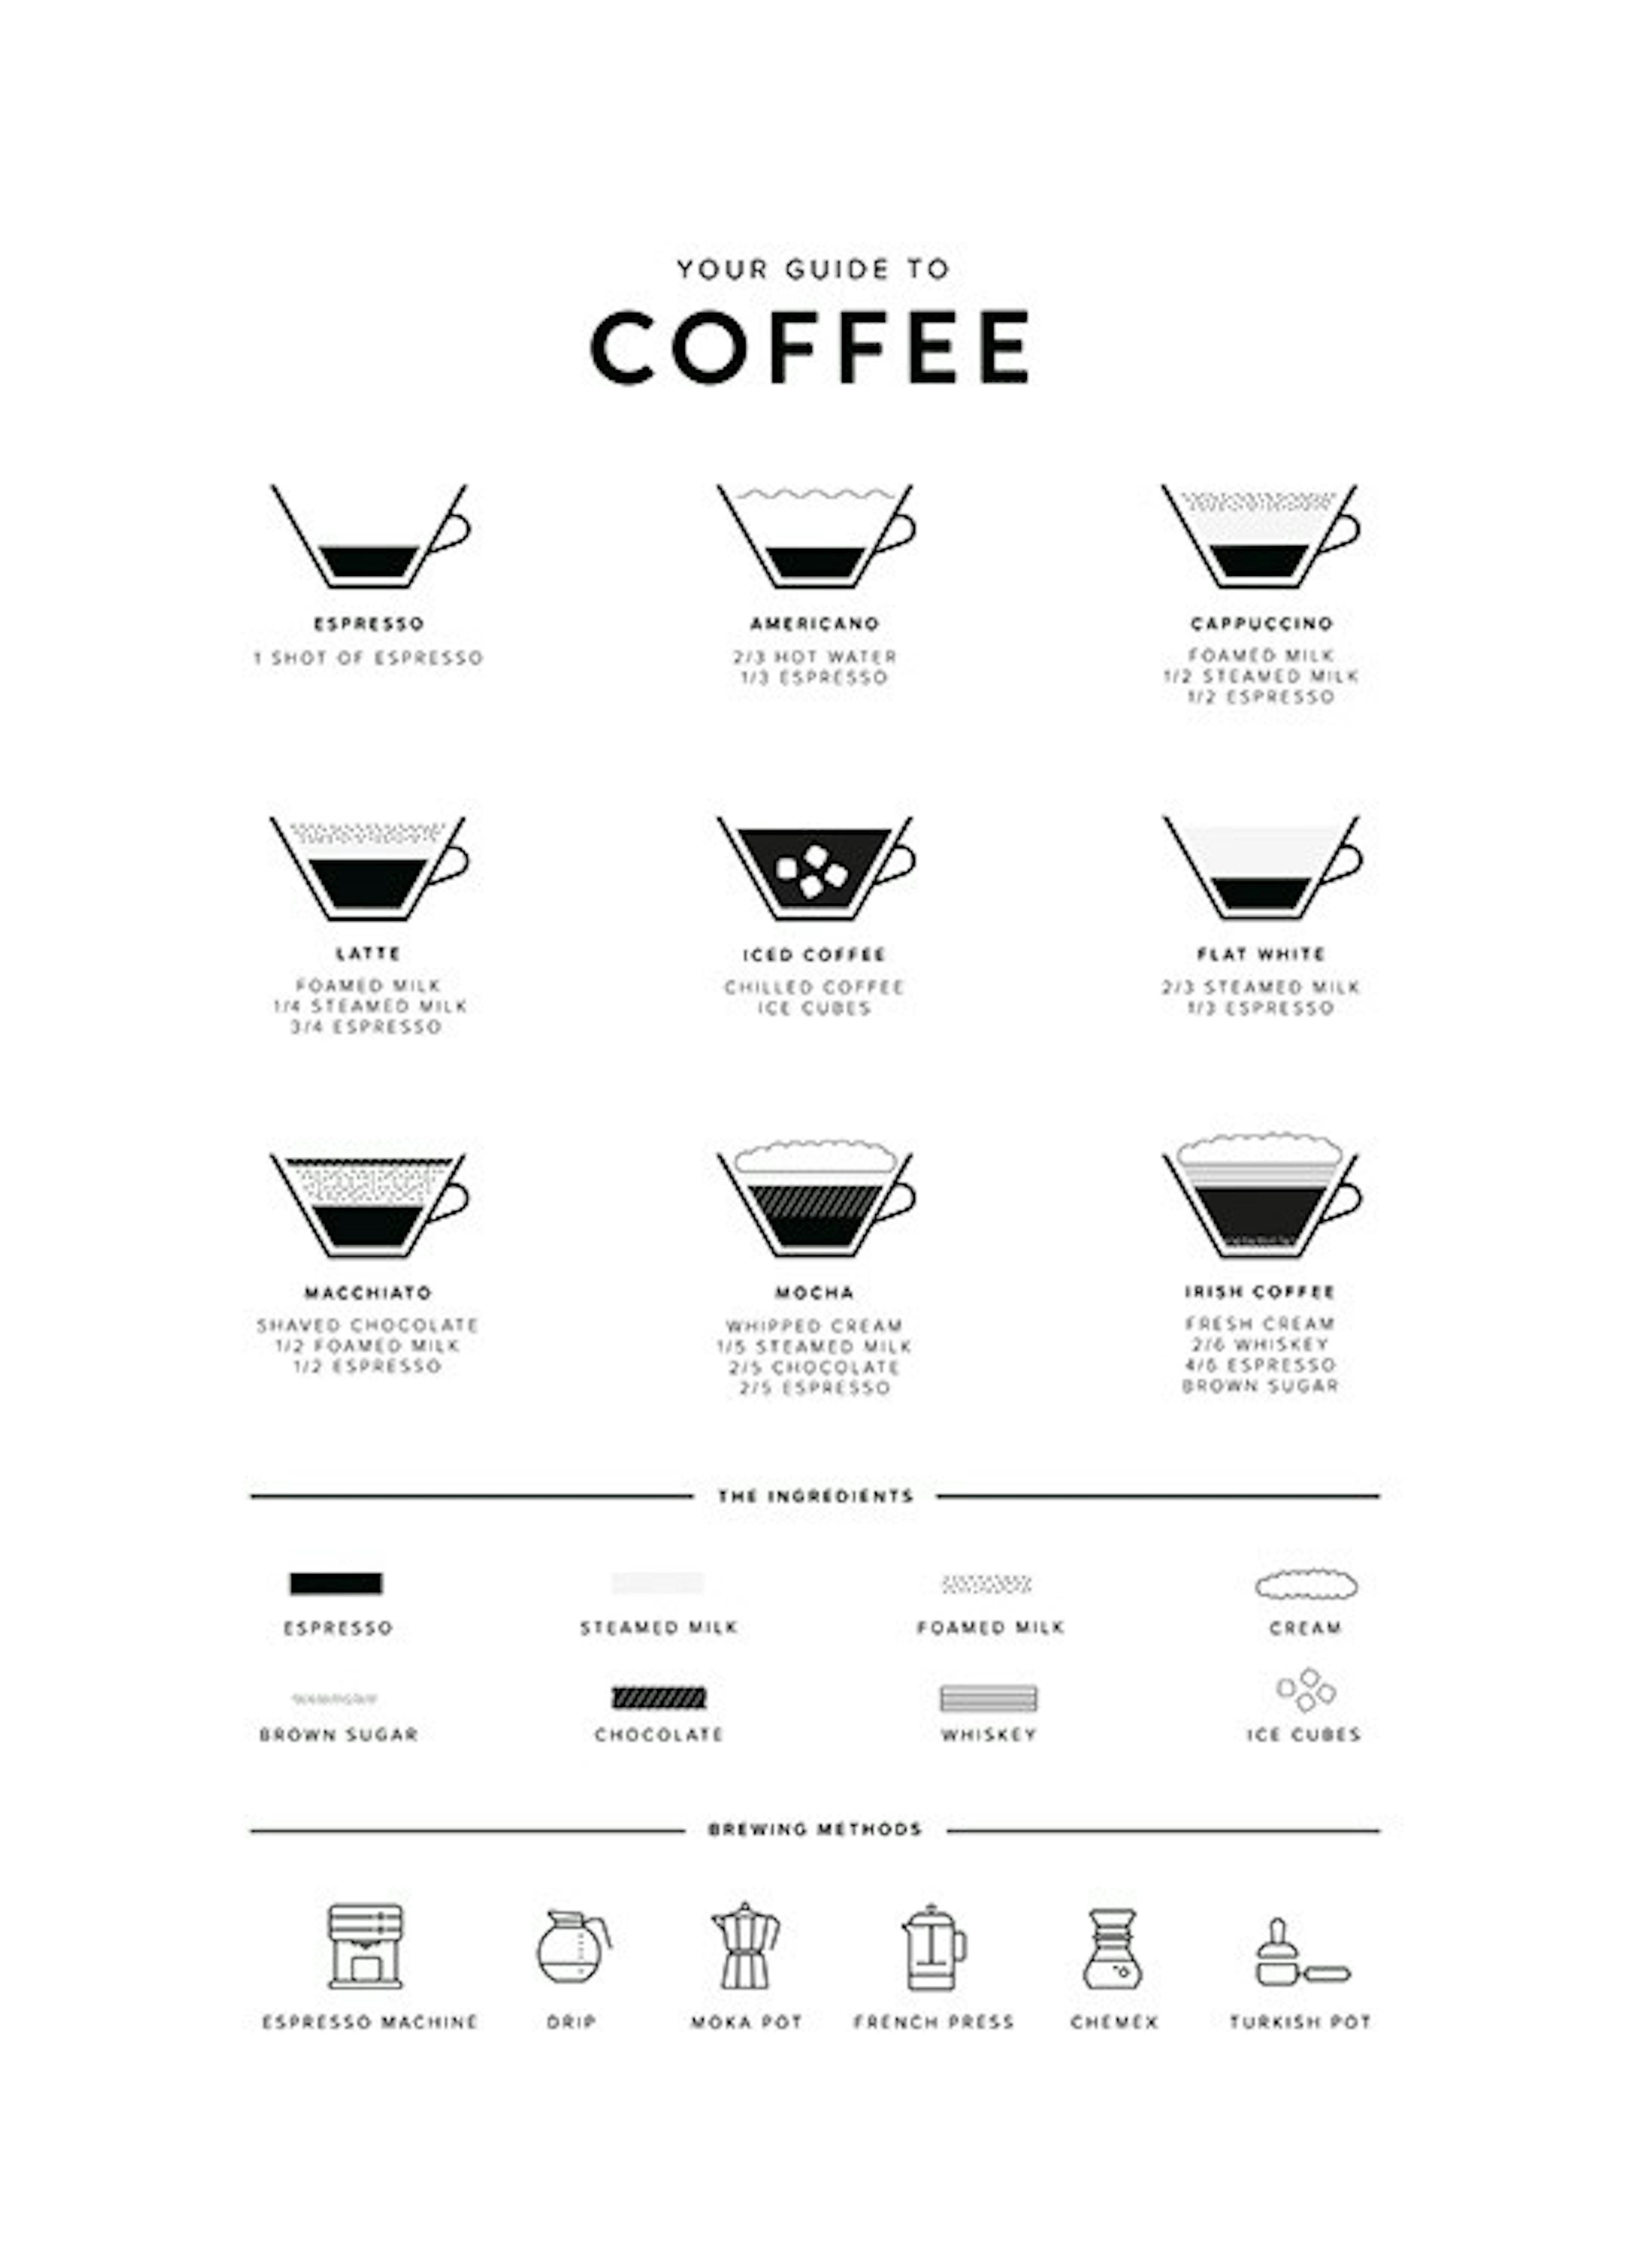 Your Guide to Coffee 포스터 0